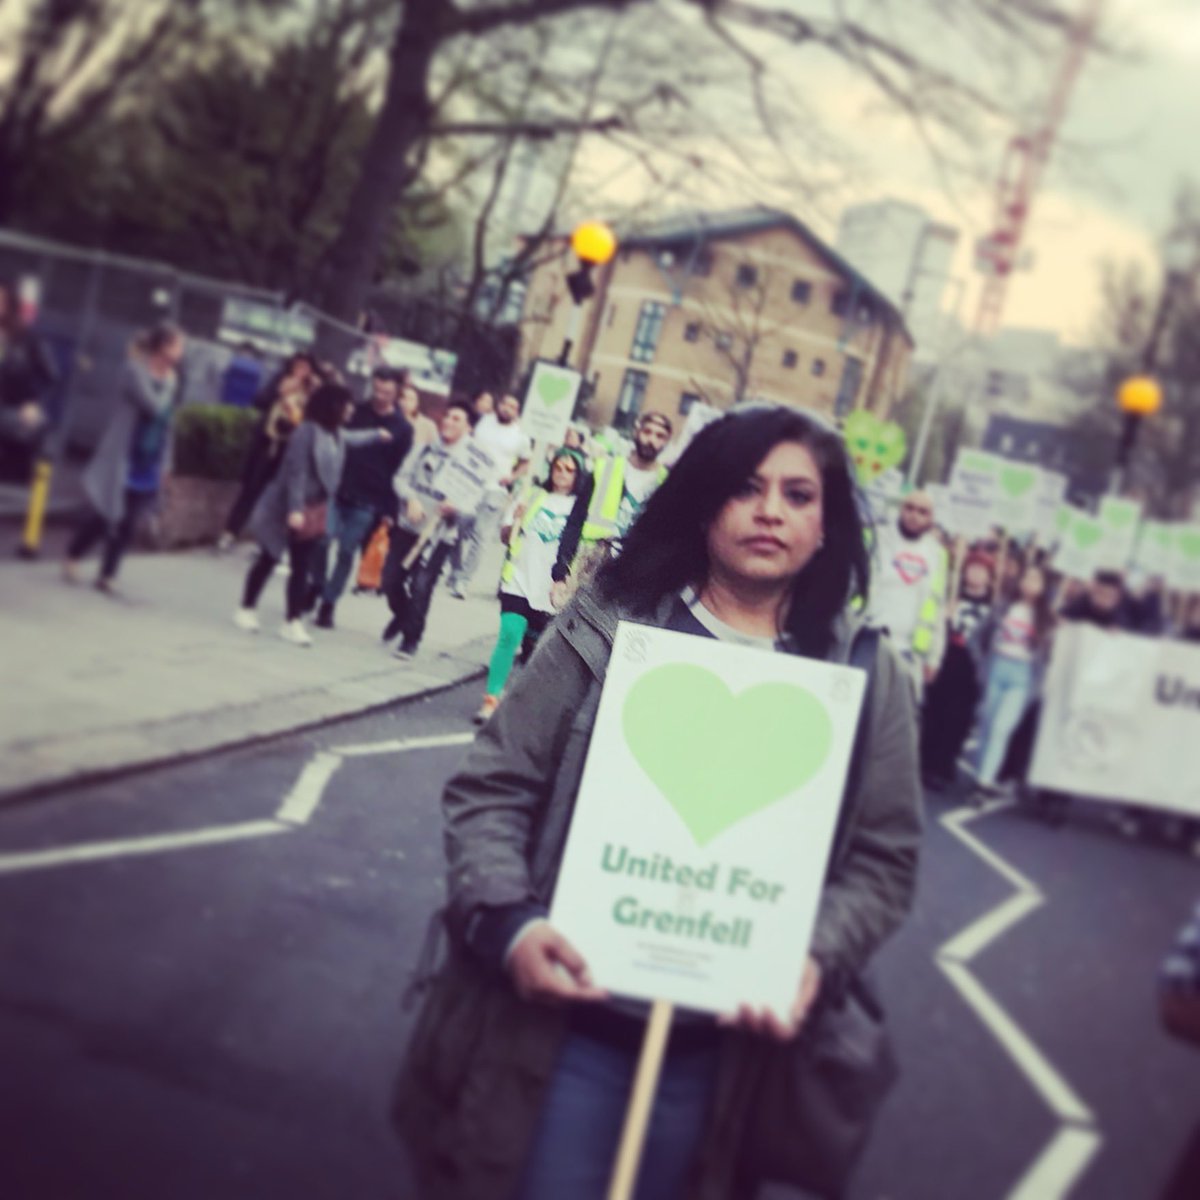 My thoughts are with the North Kensington community today as they mark the 4.5 year anniversary of #Grenfell

Tonight I will #SilentWalk with you once more, in #Solidarity & #UnitedForGrenfell 💚💚💚